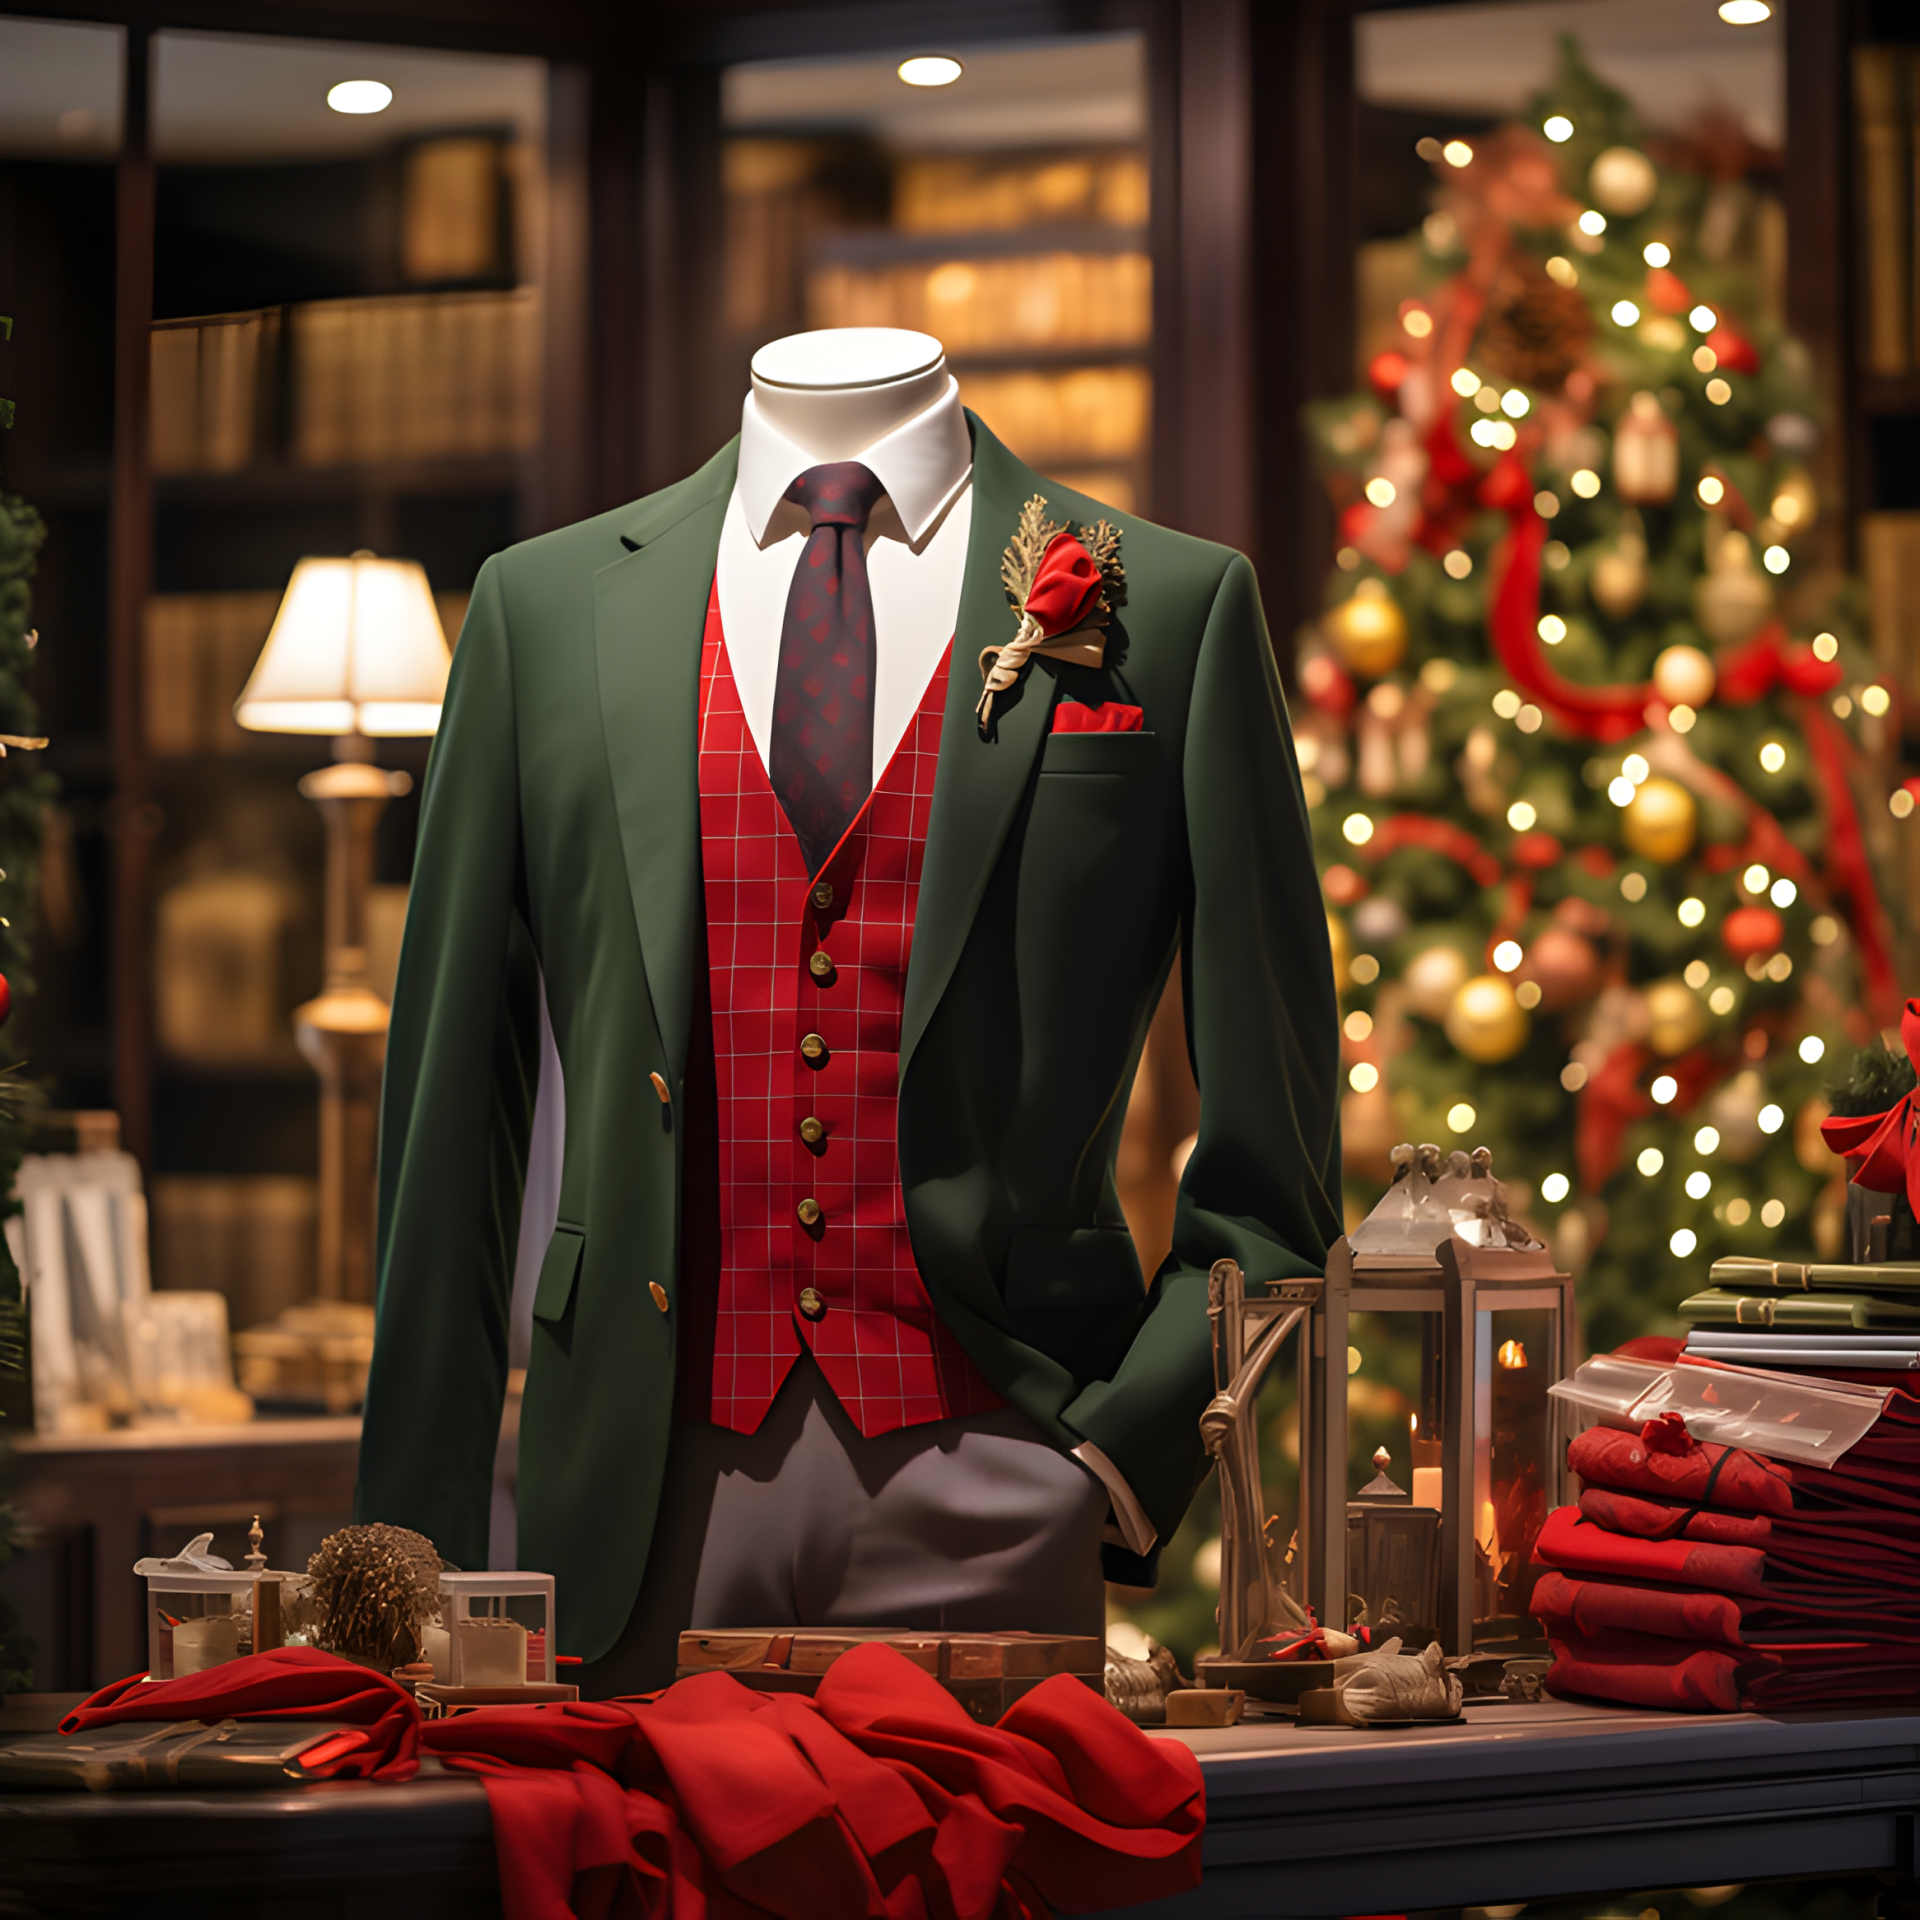 A Christmas attire in a tailoring shop